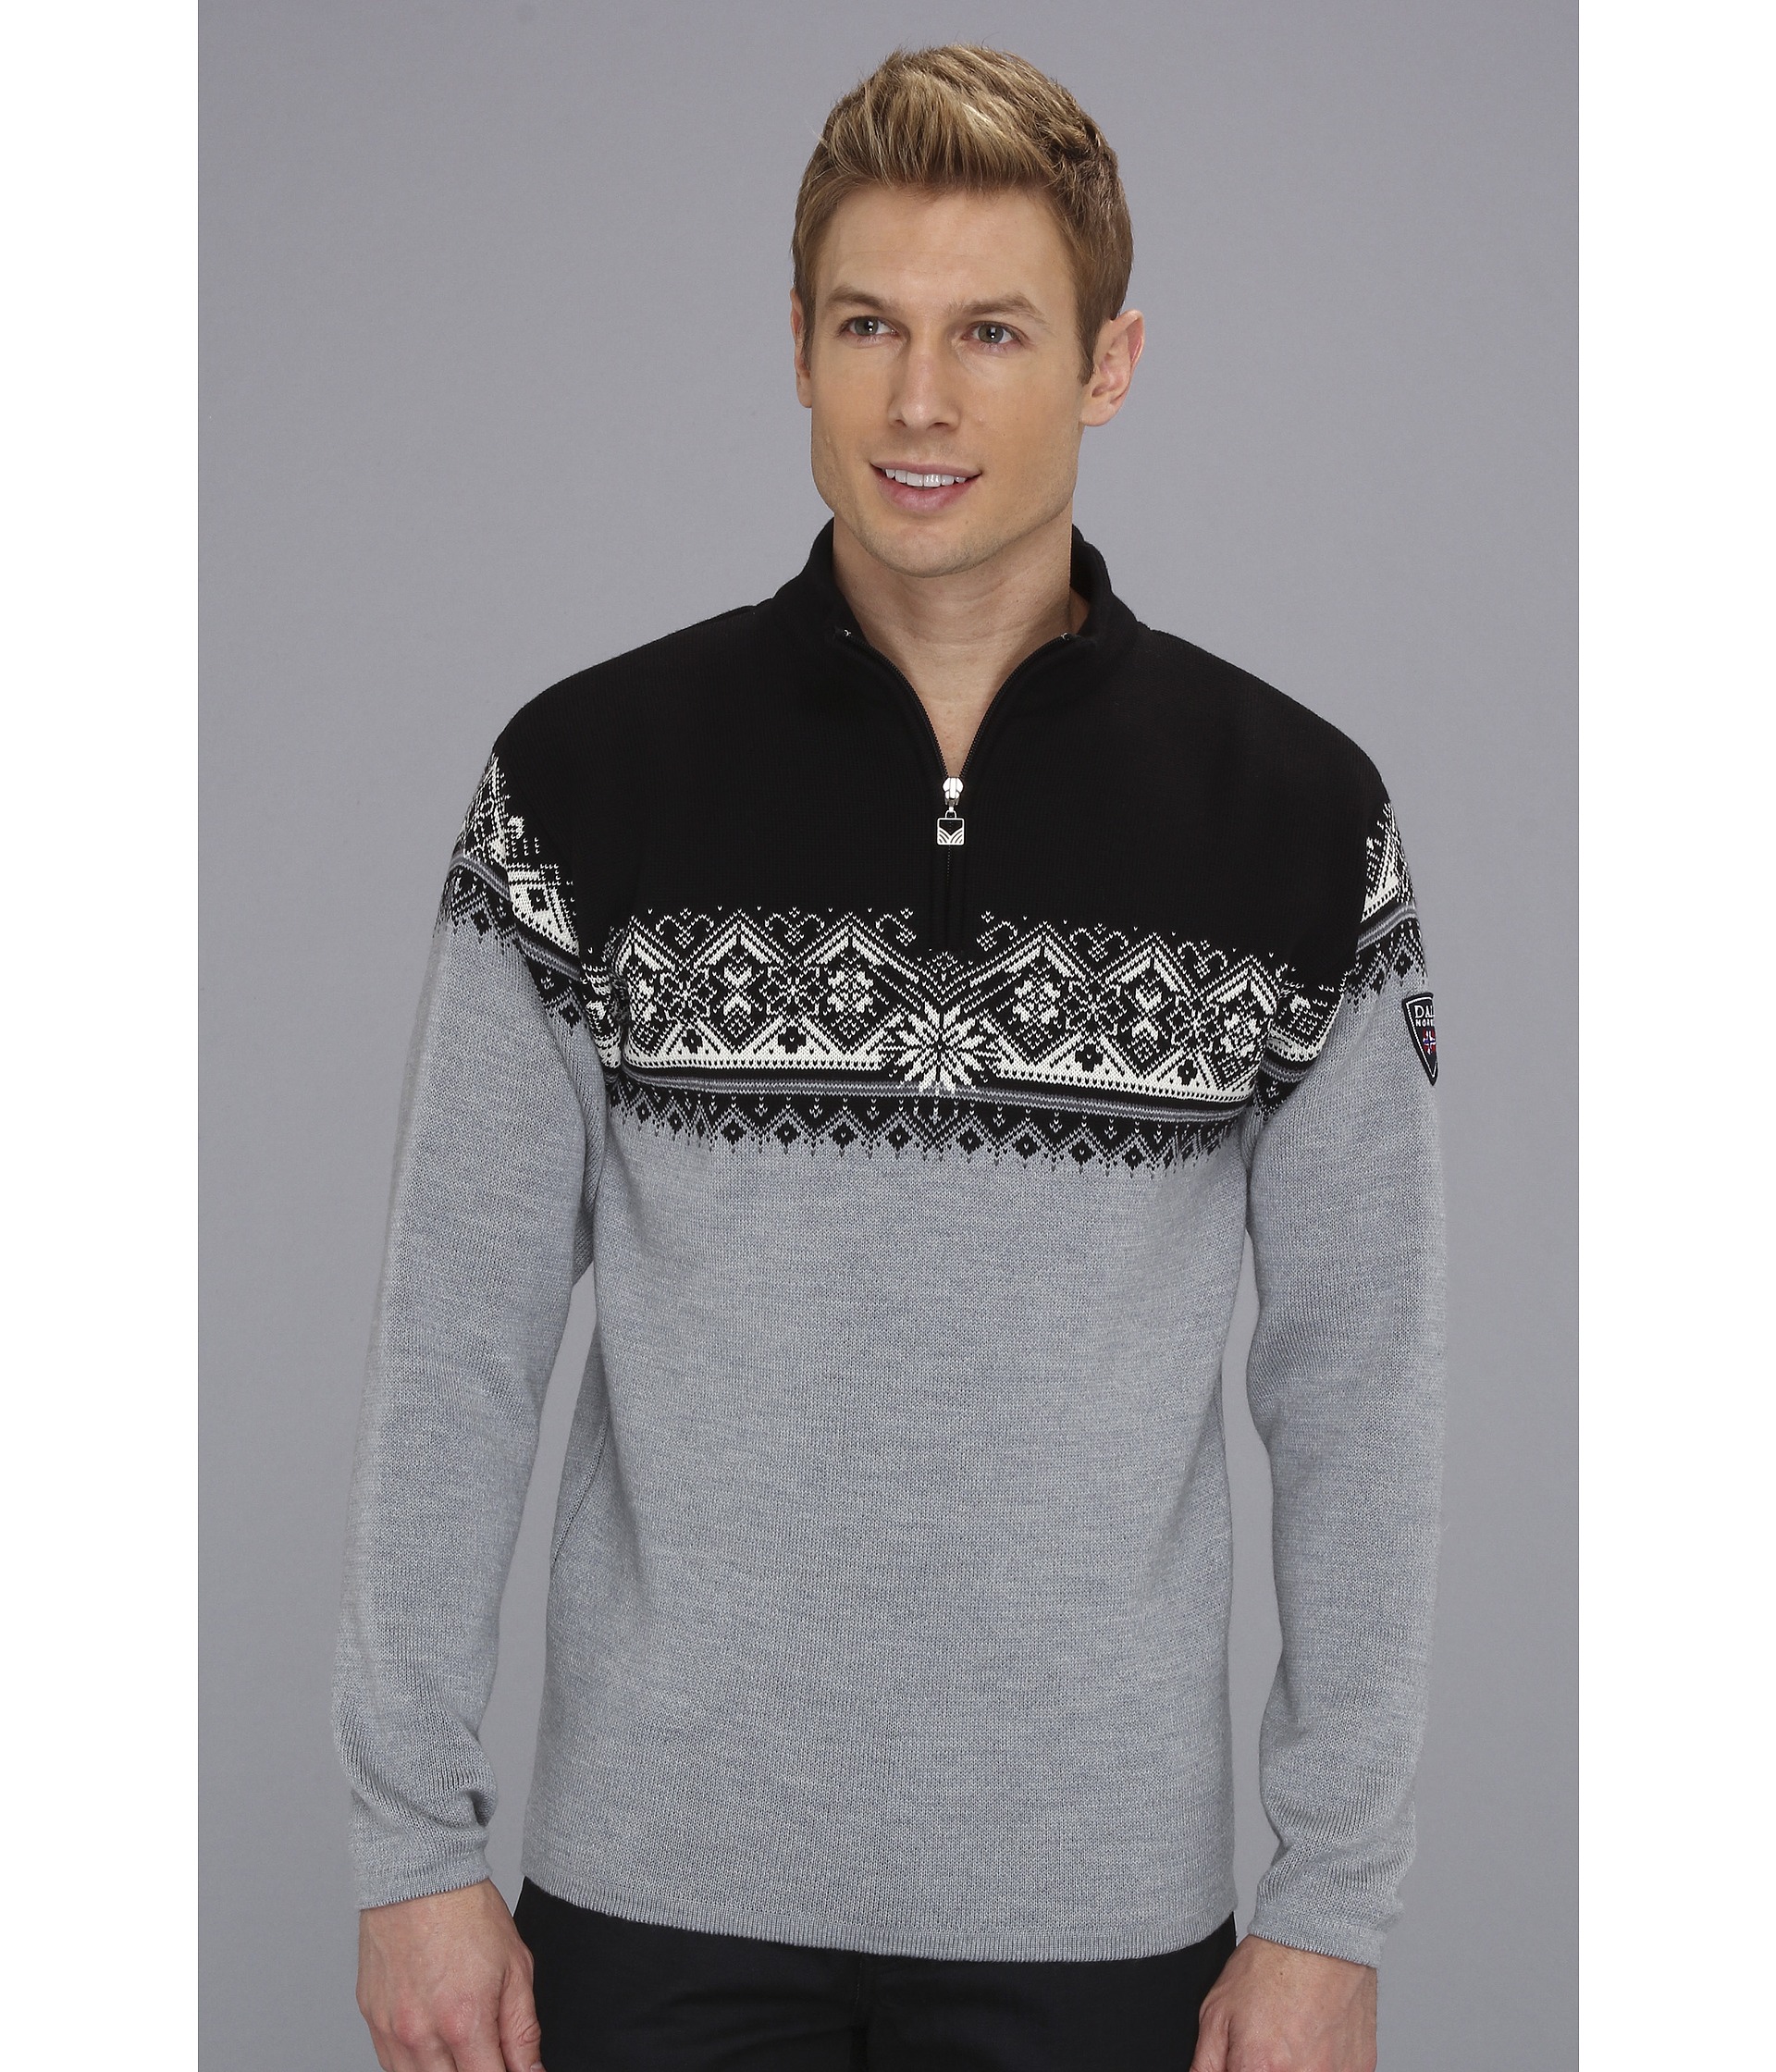 Dale of Norway St. Moritz Masculine - Zappos.com Free Shipping BOTH Ways